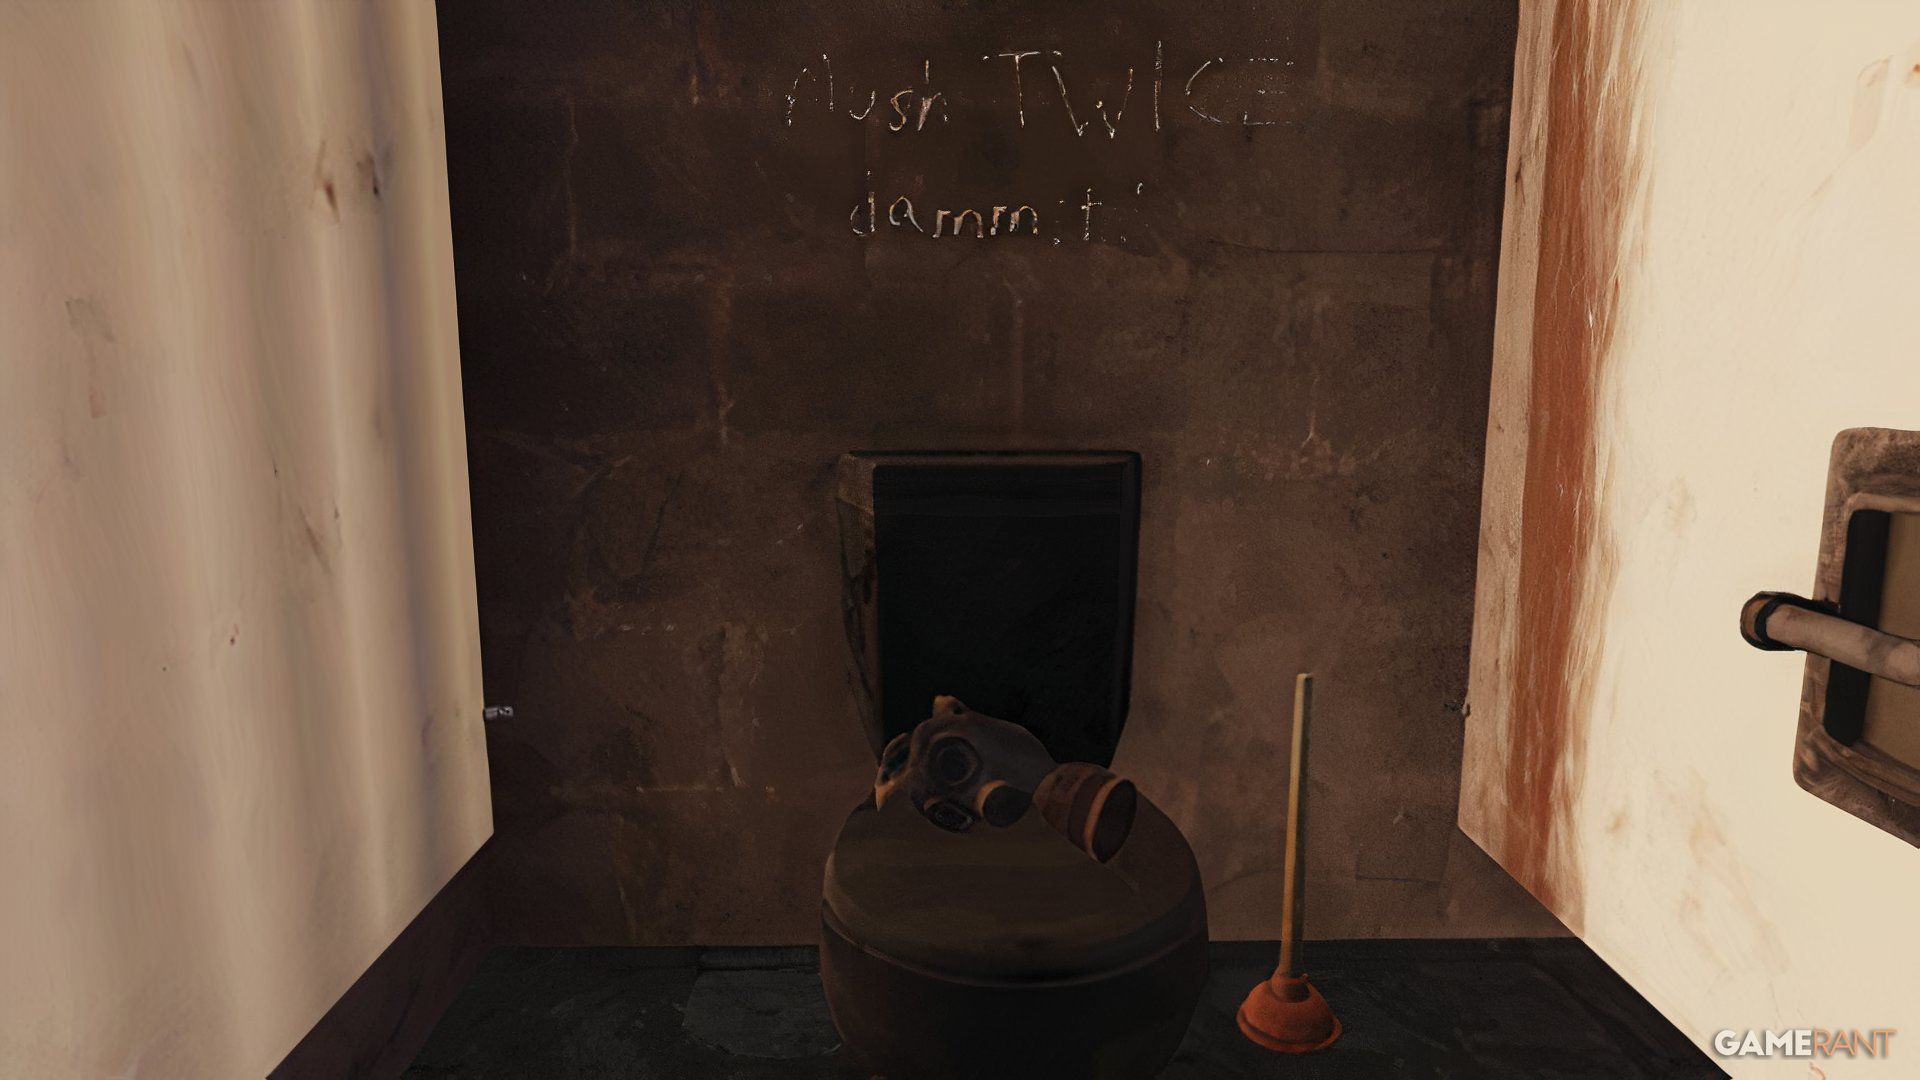 A Plunger Near A Toilet Bowl in Fallout 76